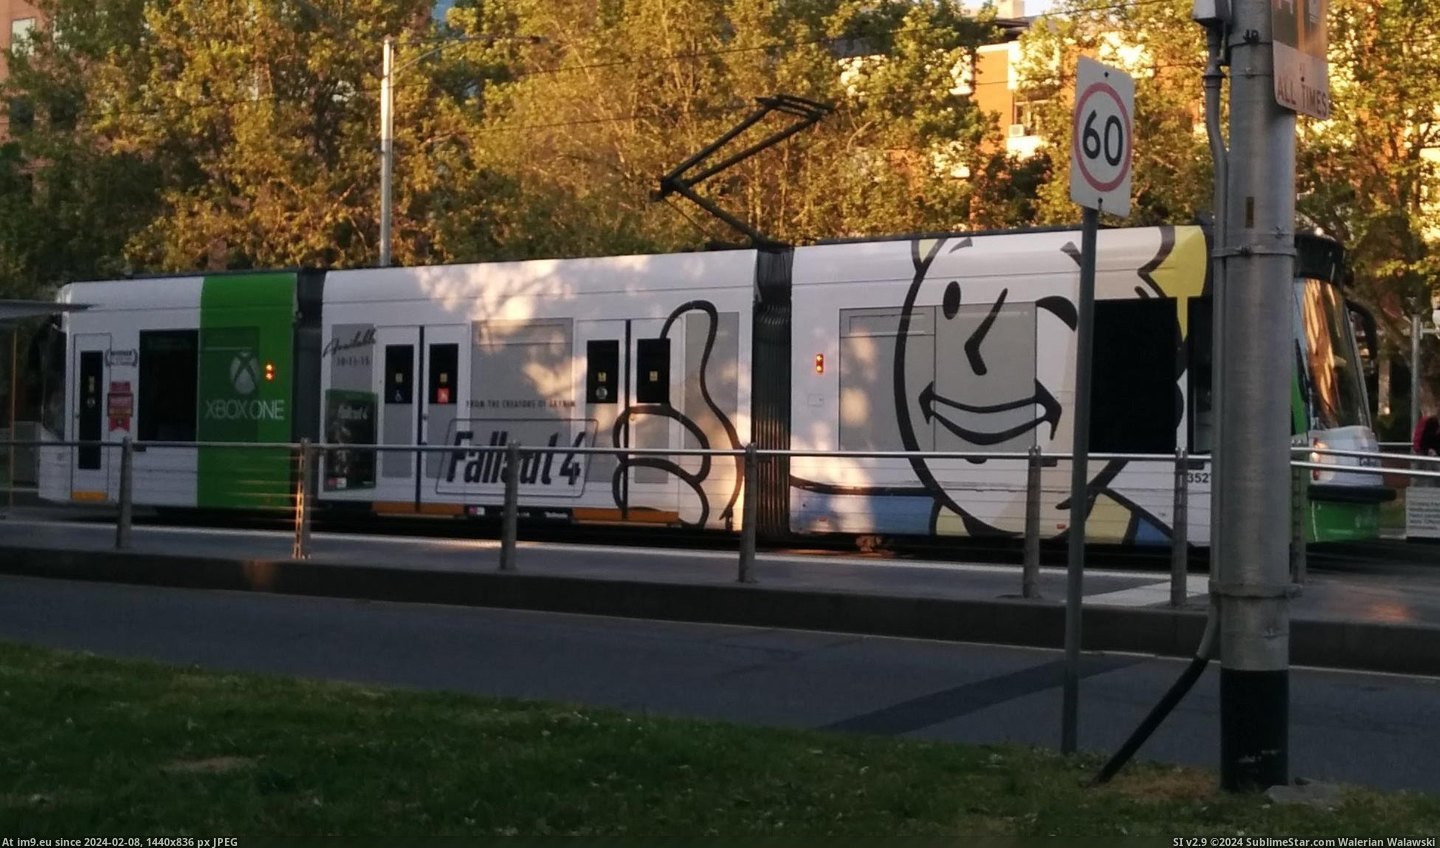 [Gaming] All aboard the Fallout 4 hype tram! Melbourne, Australia. (in My r/GAMING favs)